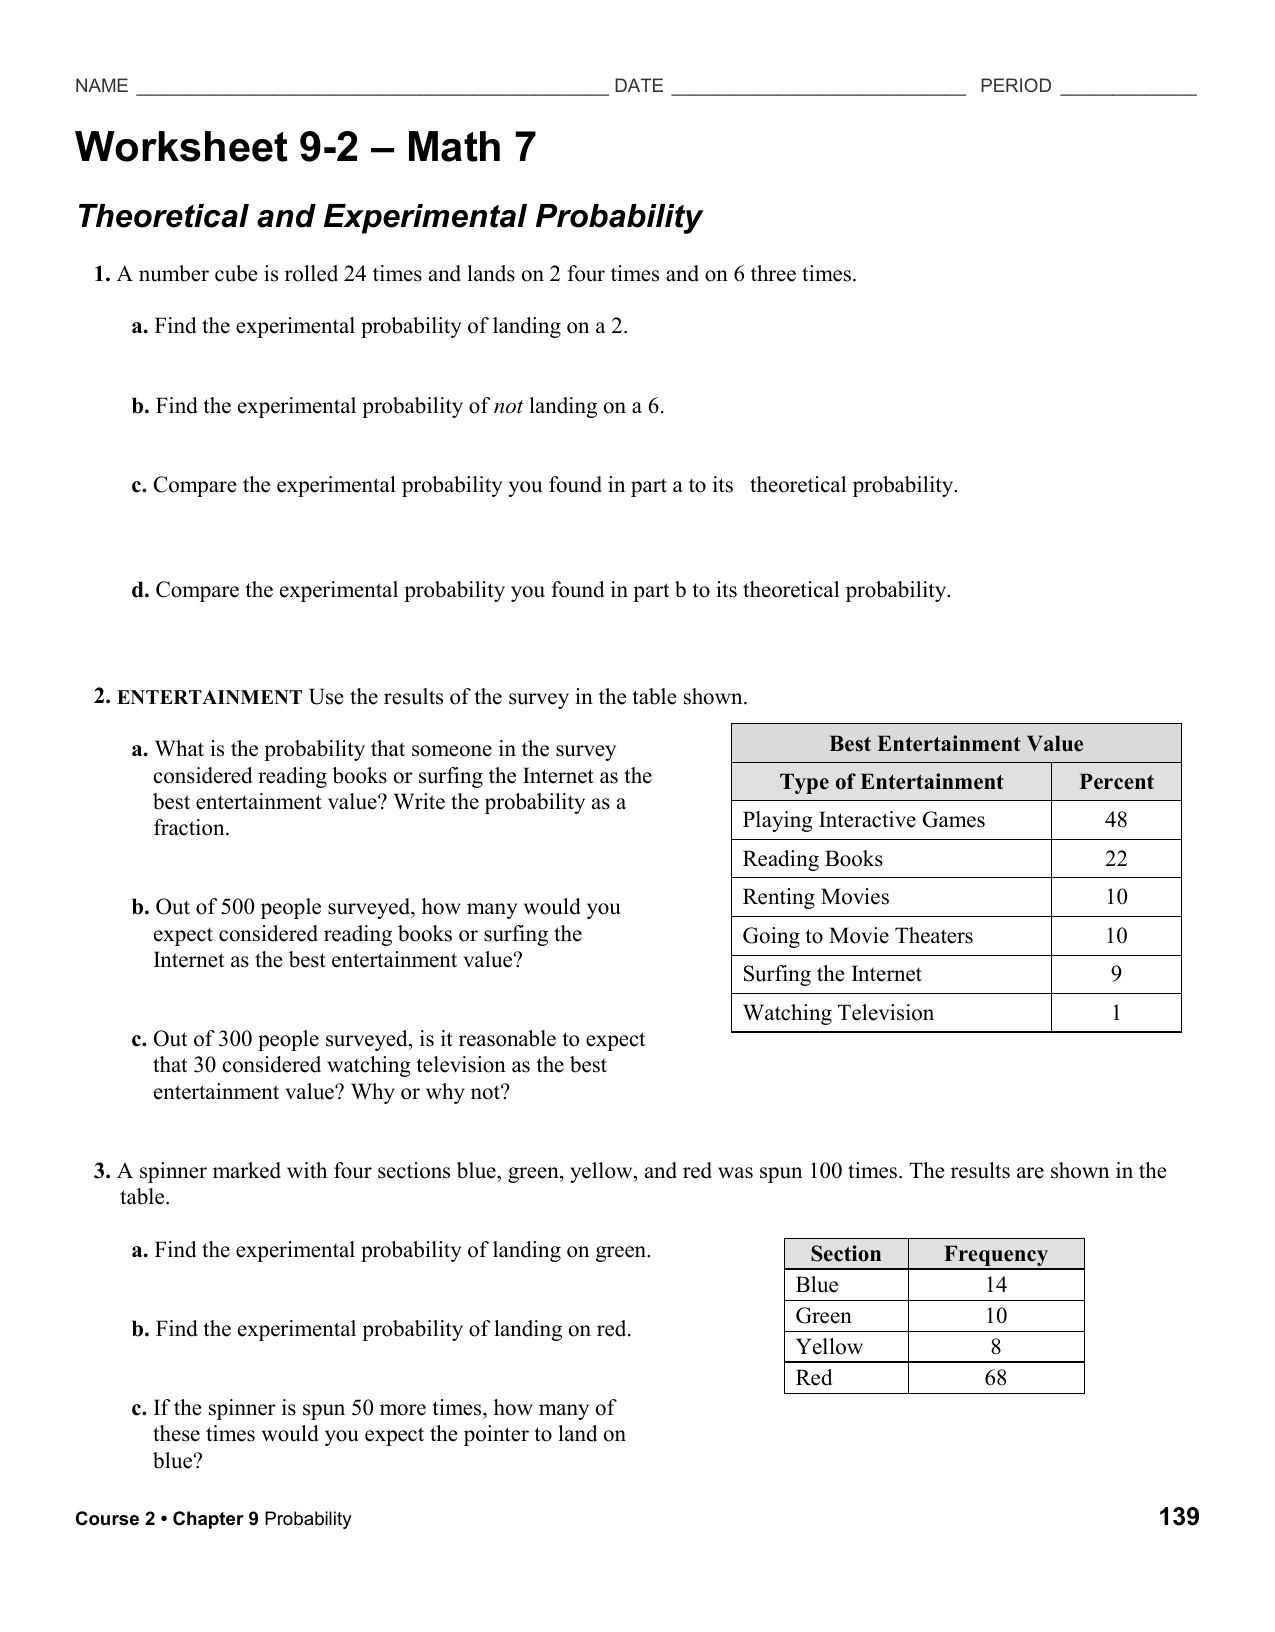 prob homework- Math 21-21 With Regard To Theoretical And Experimental Probability Worksheet